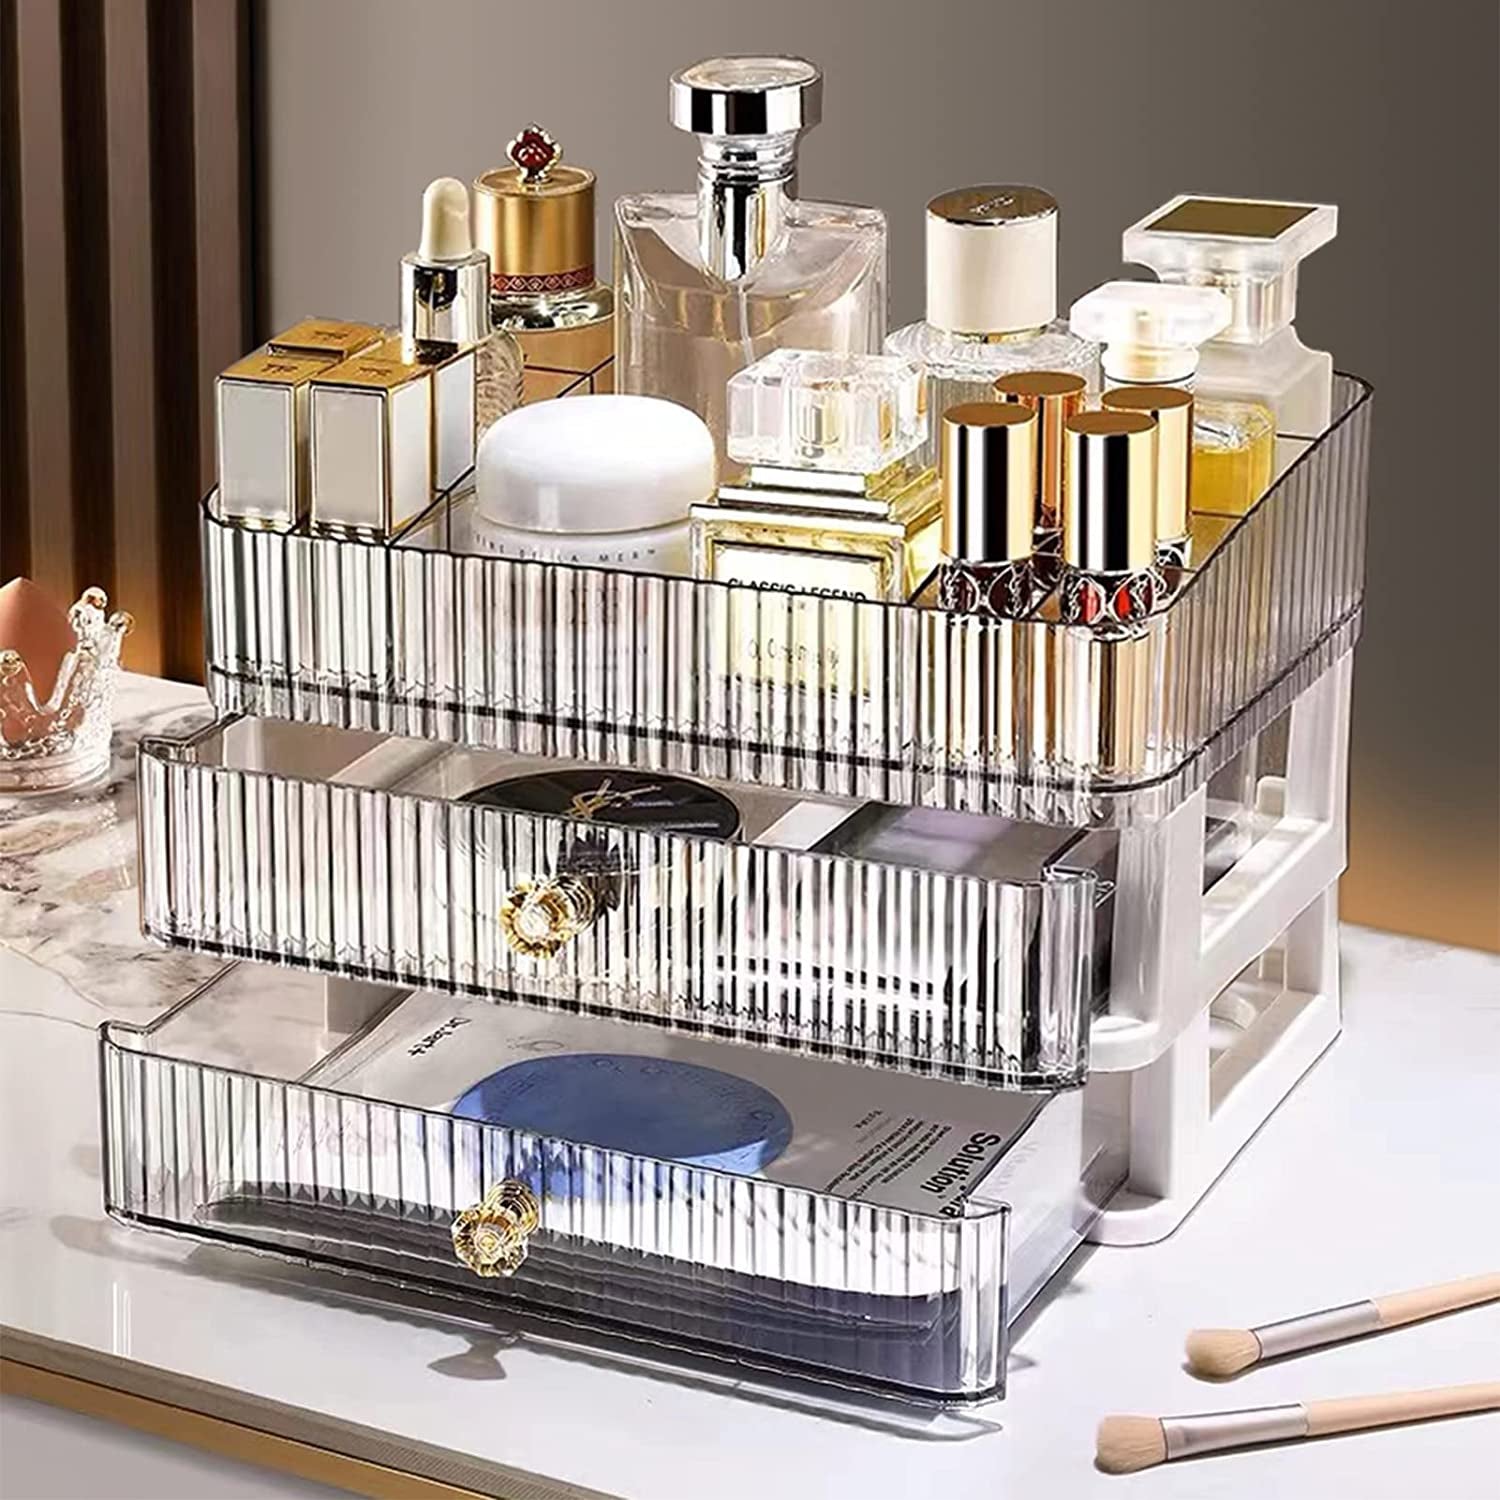 Blushbees® 2-Drawer Makeup Organizer for Bathroom and Bedroom Vanity Countertops